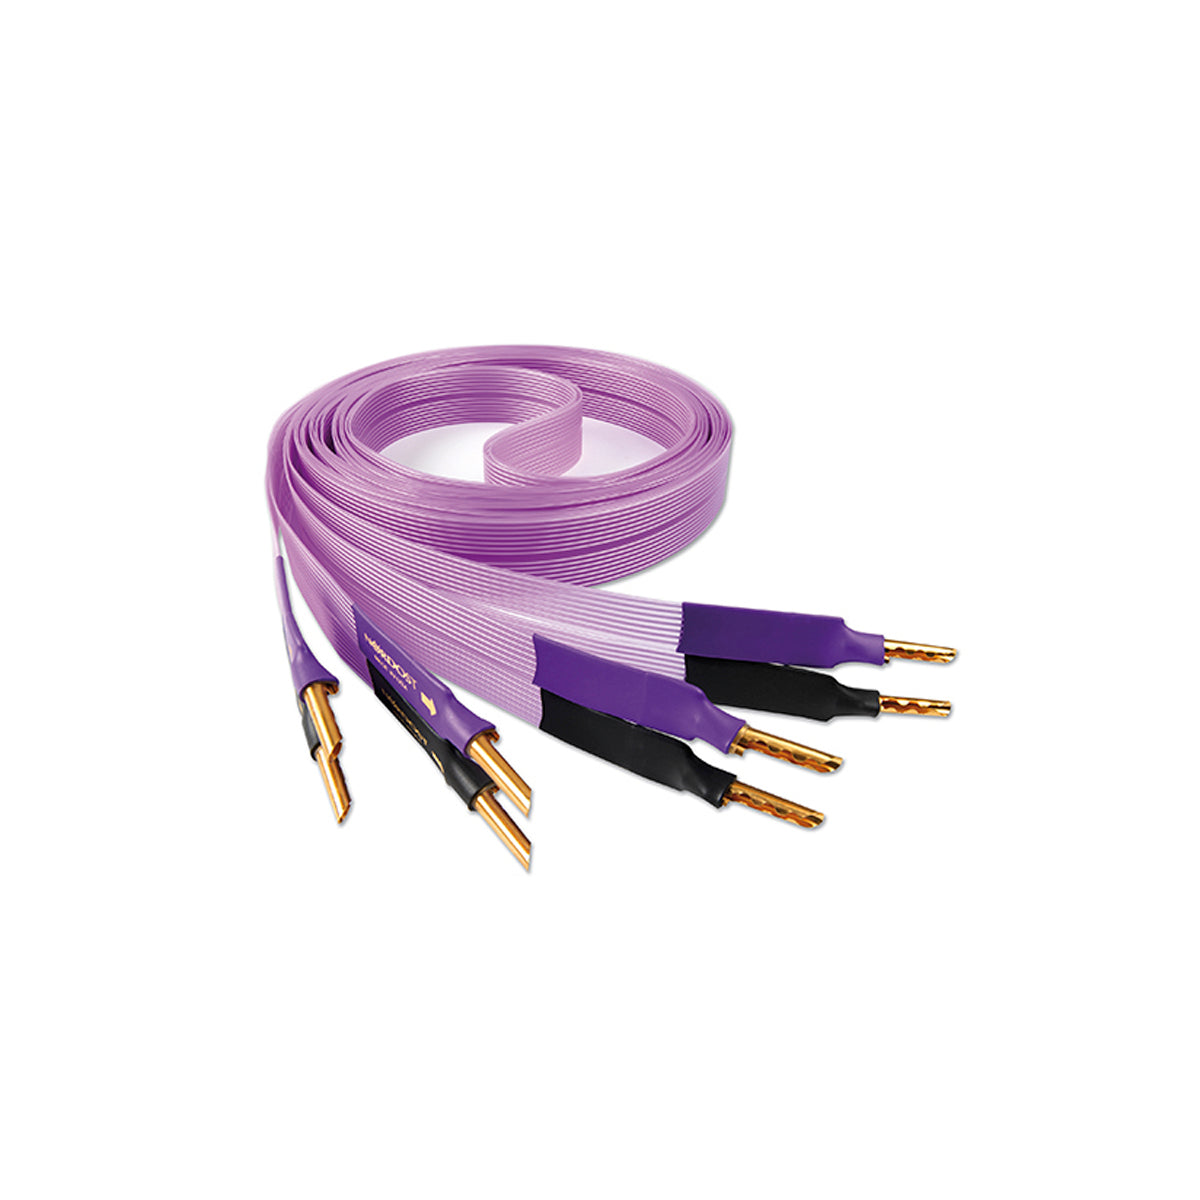 Nordost Purple Flare Speaker Cable - The Audio Experts